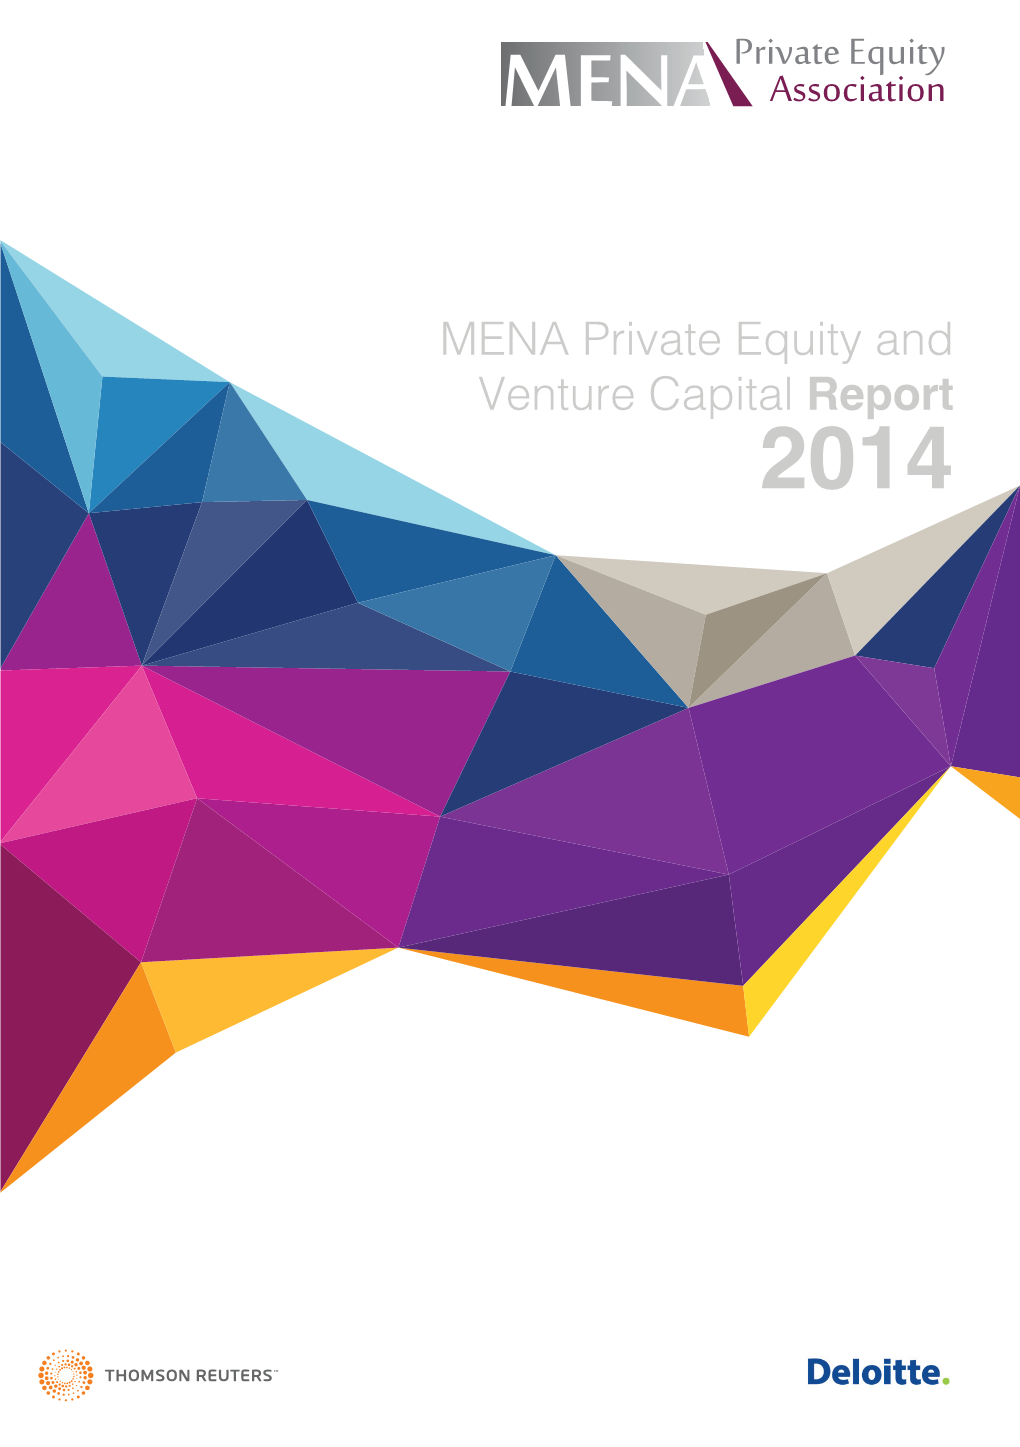 MENA Private Equity and Venture Capital Report